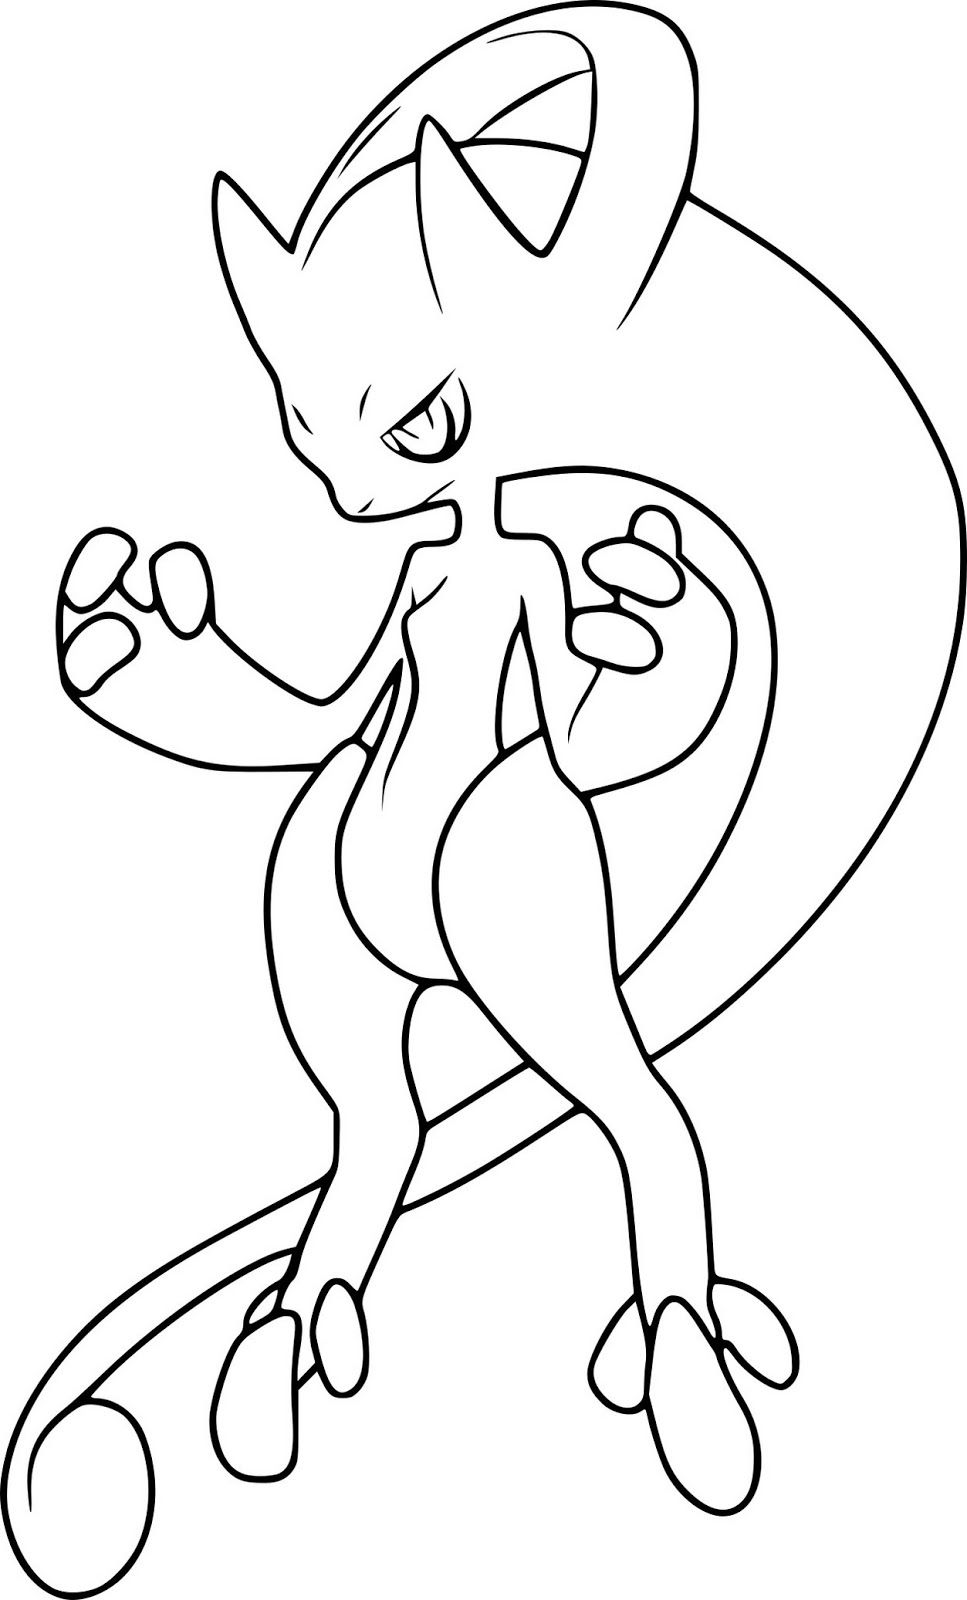 Mewtwo Coloring Pages Printable